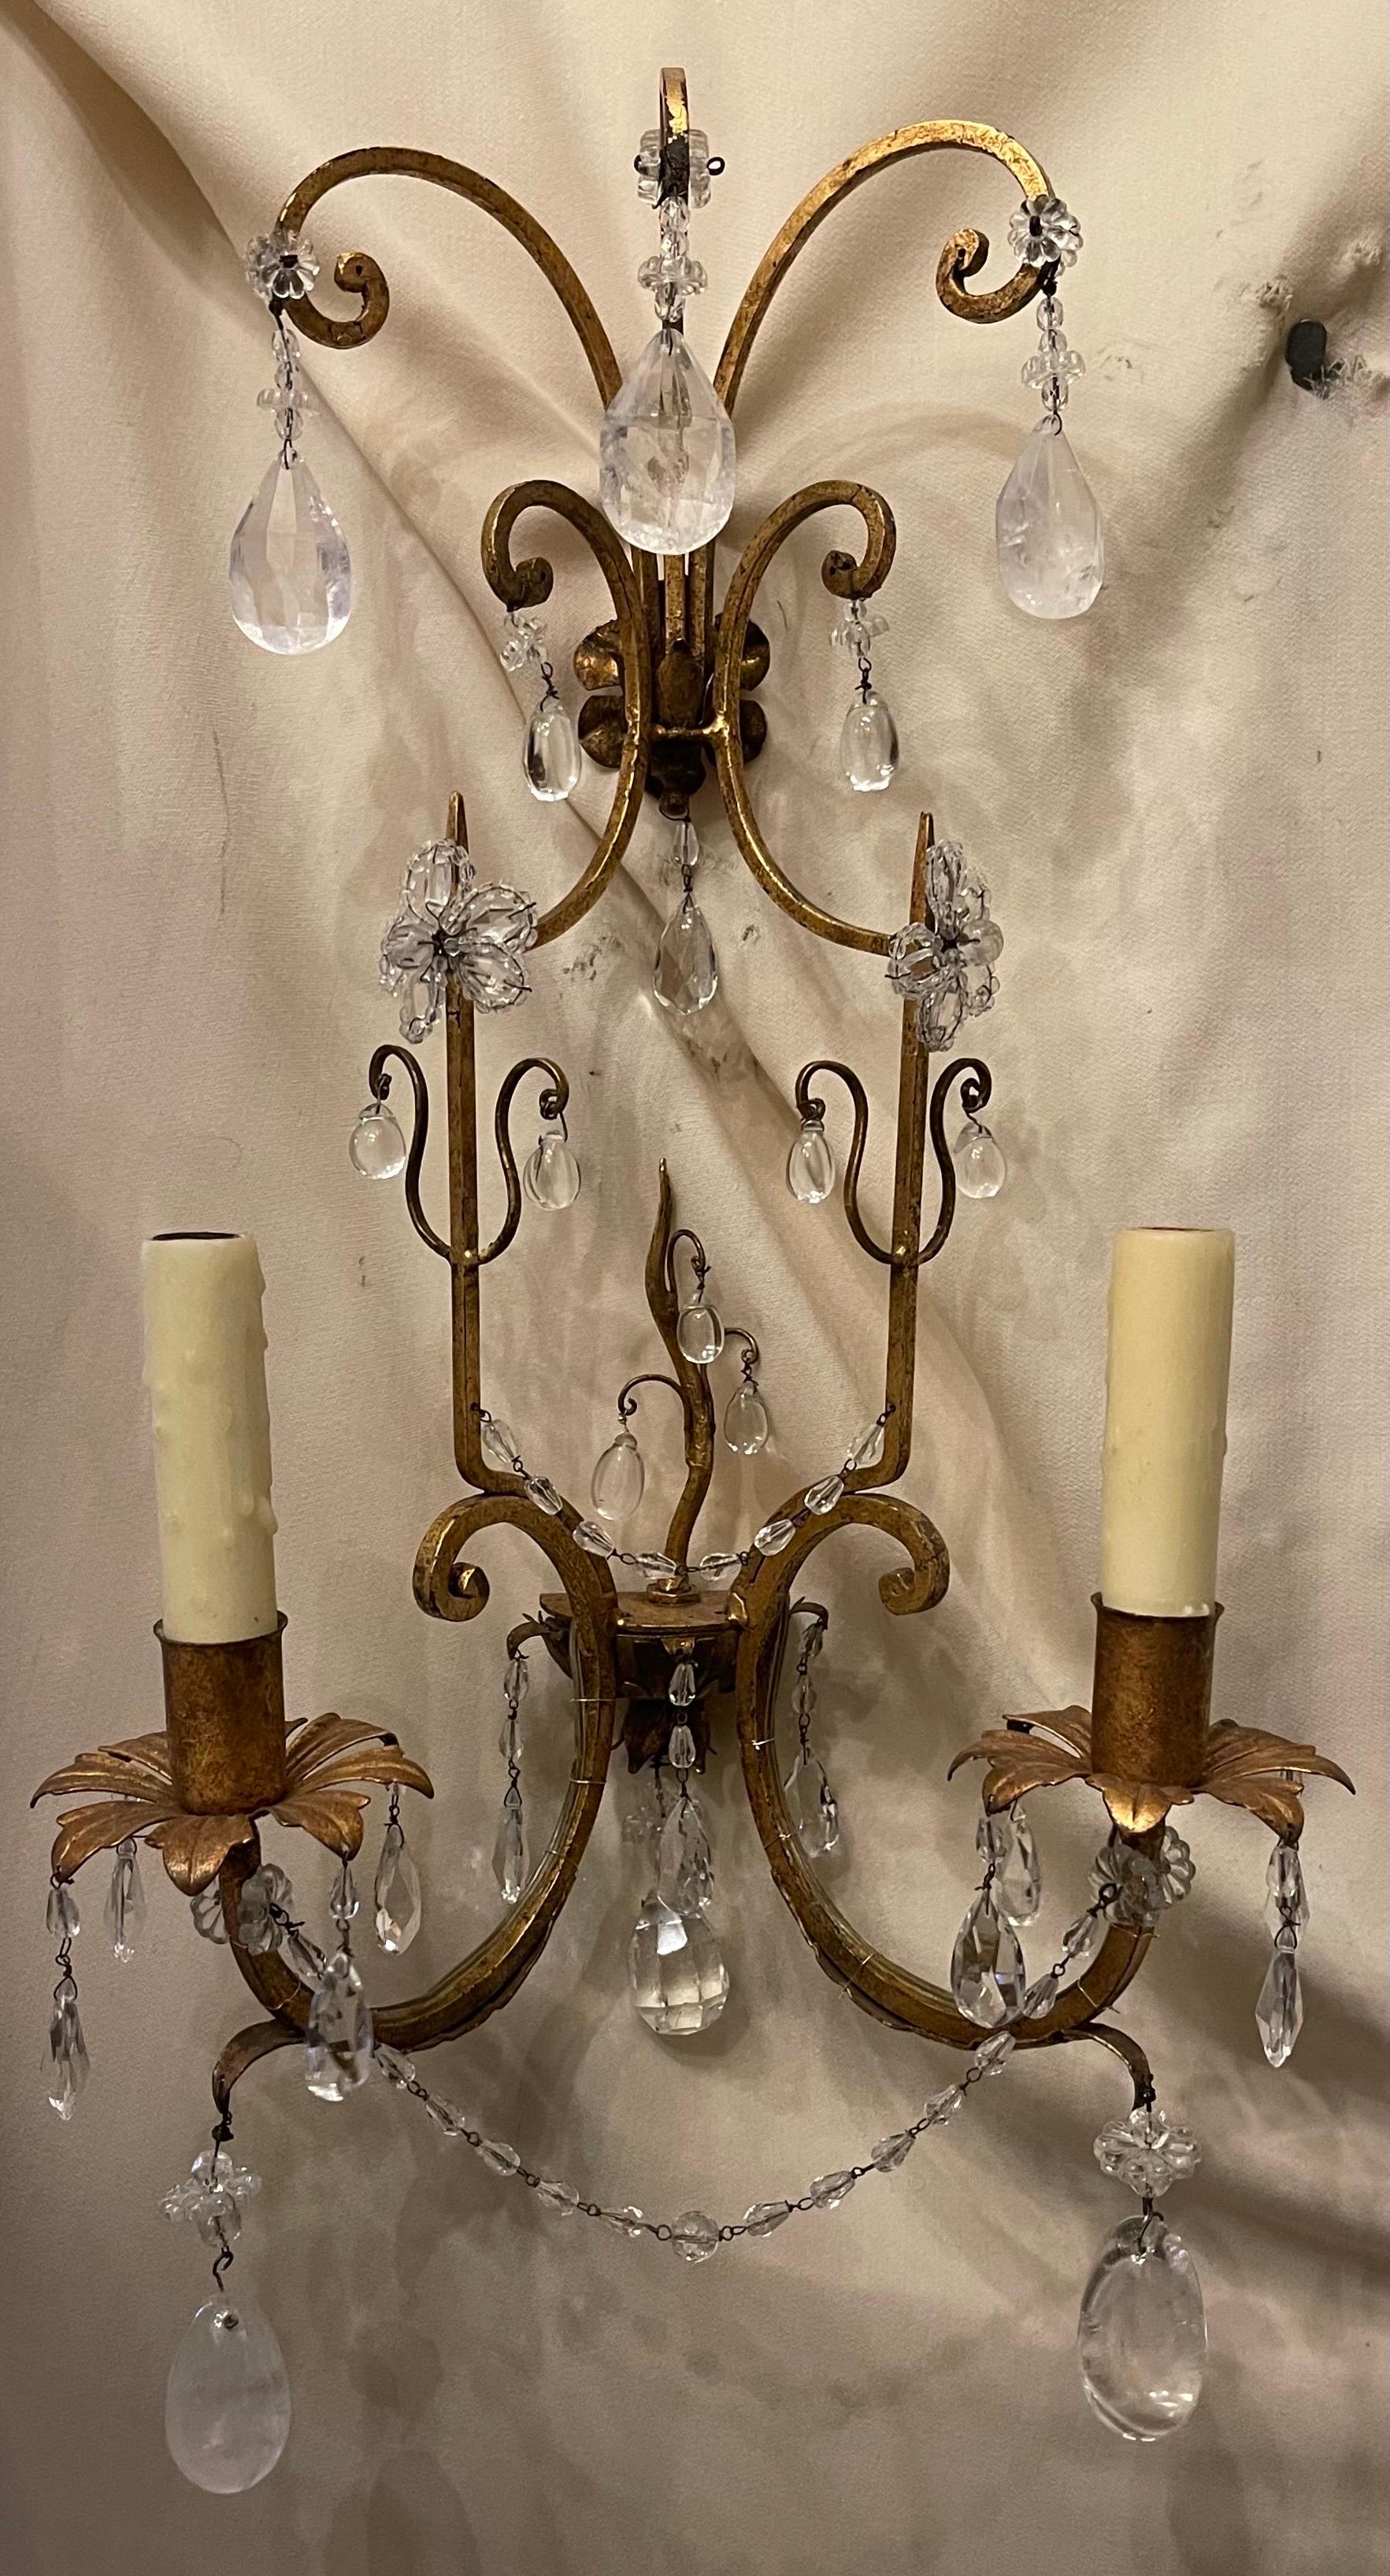 A Wonderful Pair Of Vintage Gold Gilt With Rock Crystal & Alternating Crystal Drop Maison Baguès Style With Beautiful Flower Mendelian Sconces Purchased From Nestle NYC